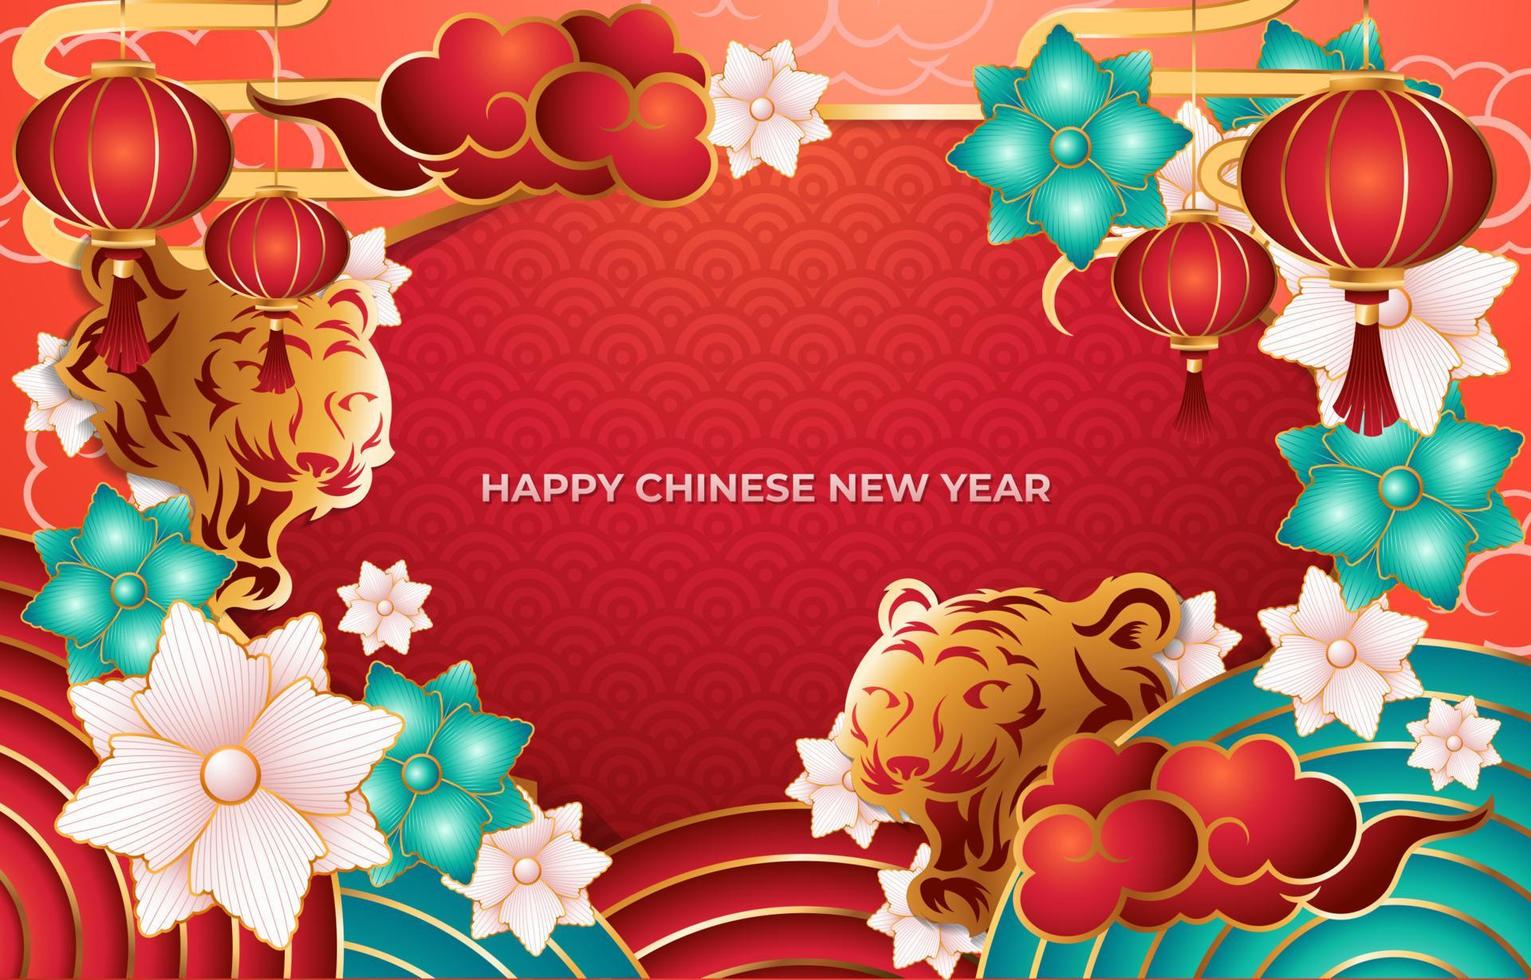 Happy Chinese New Year with Year Of The Tiger vector